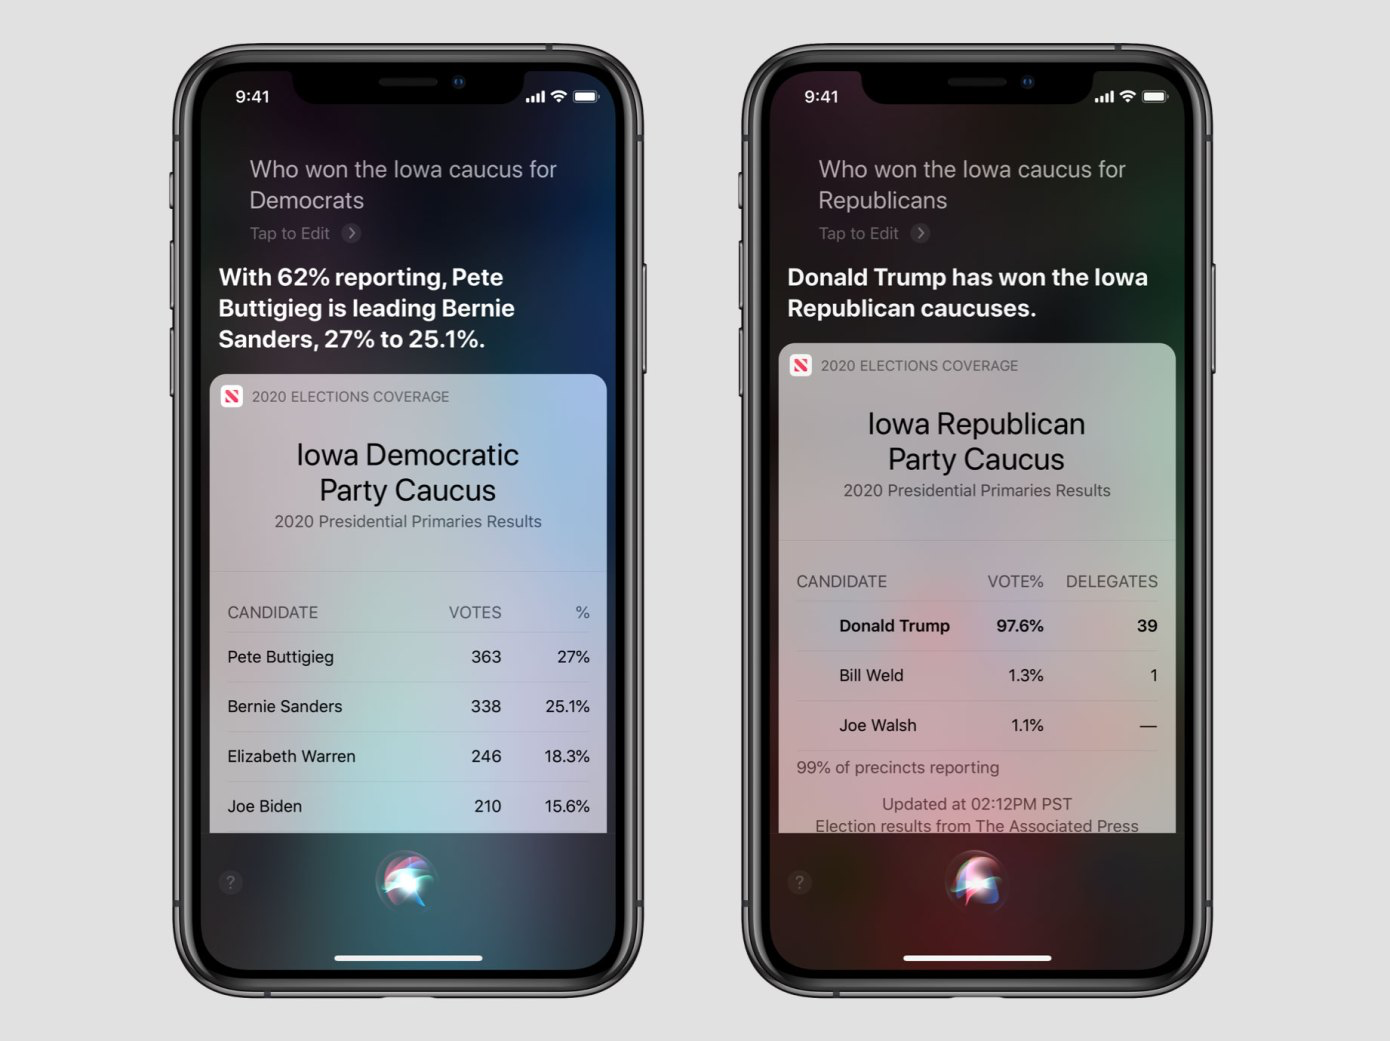 Siri Now Able to Answer U.S. Election Questions